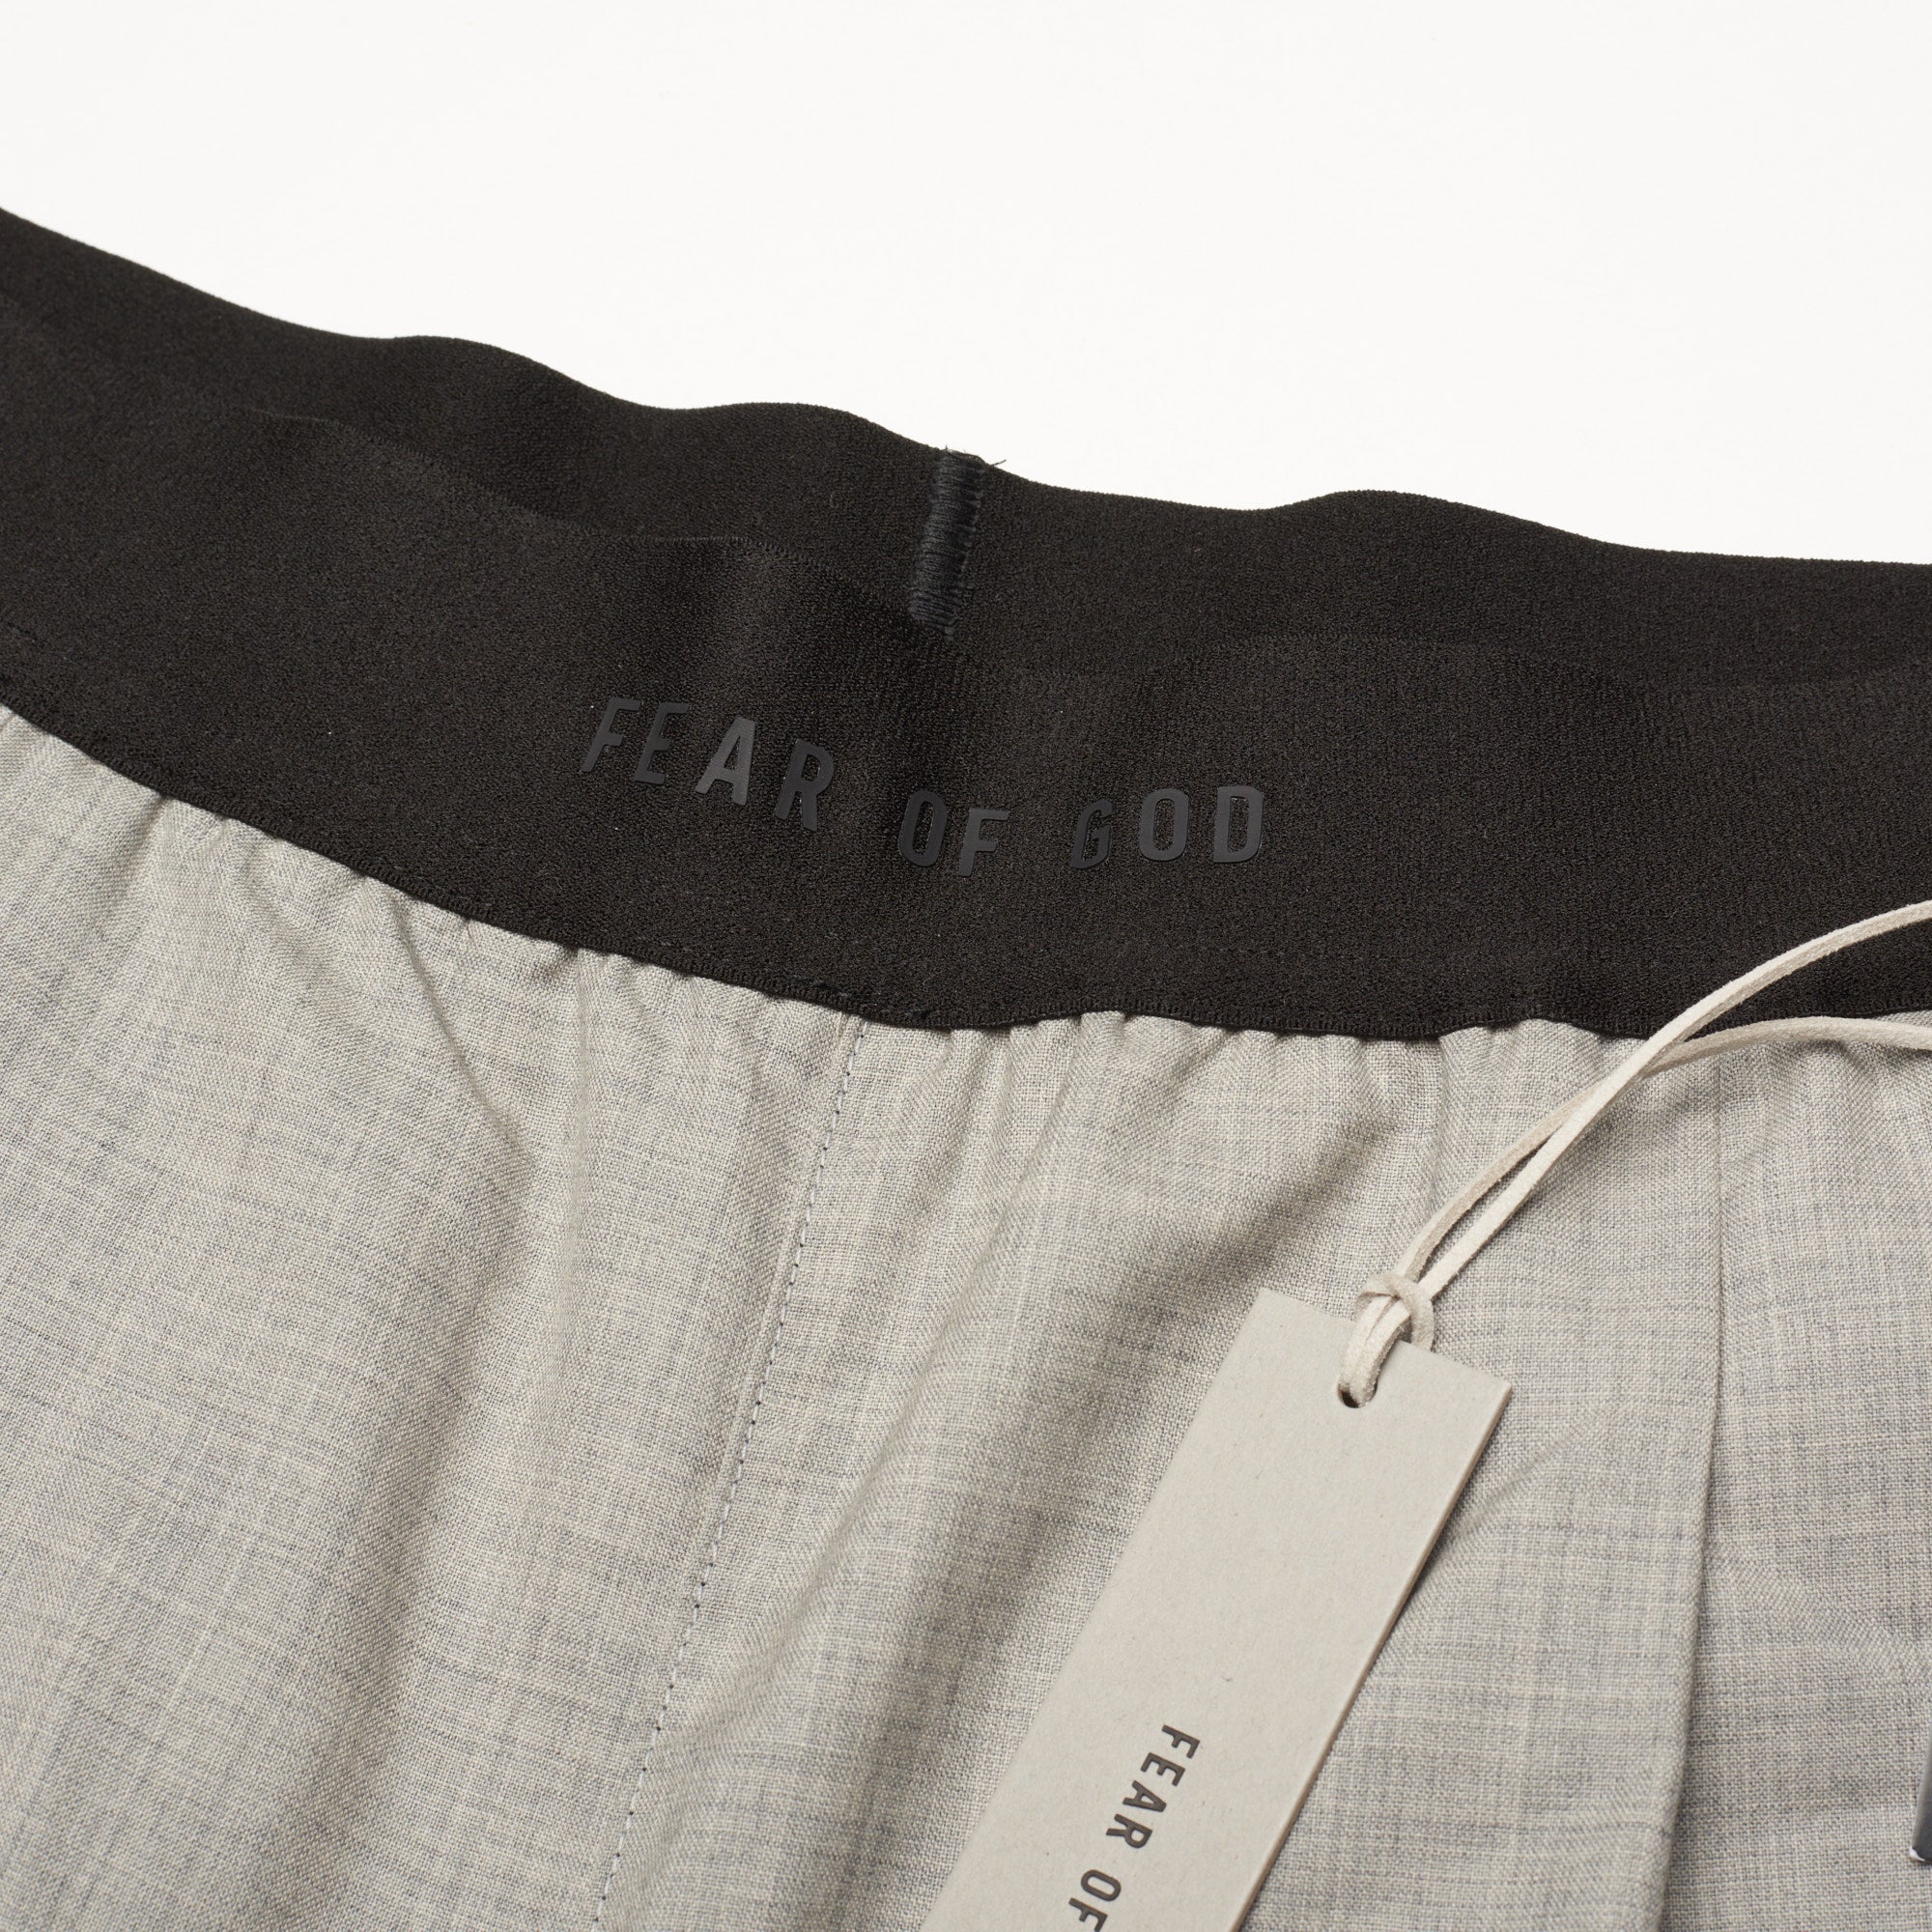 FEAR OF GOD Seventh Collection Gray Wool Pants NEW Size Large FEAR OF GOD